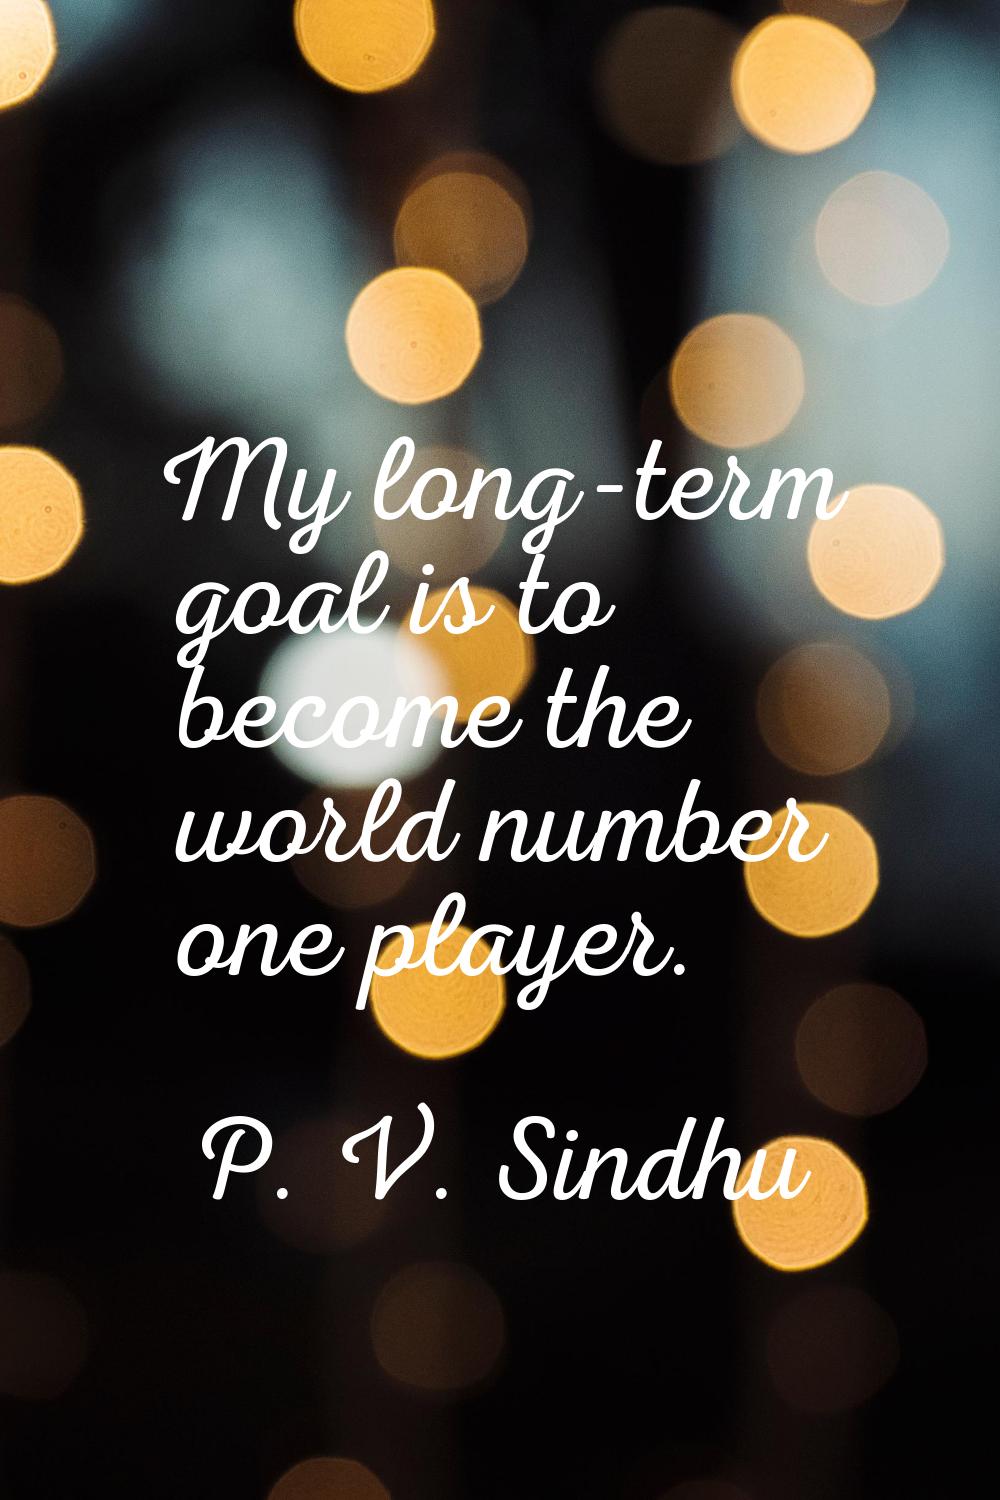 My long-term goal is to become the world number one player.